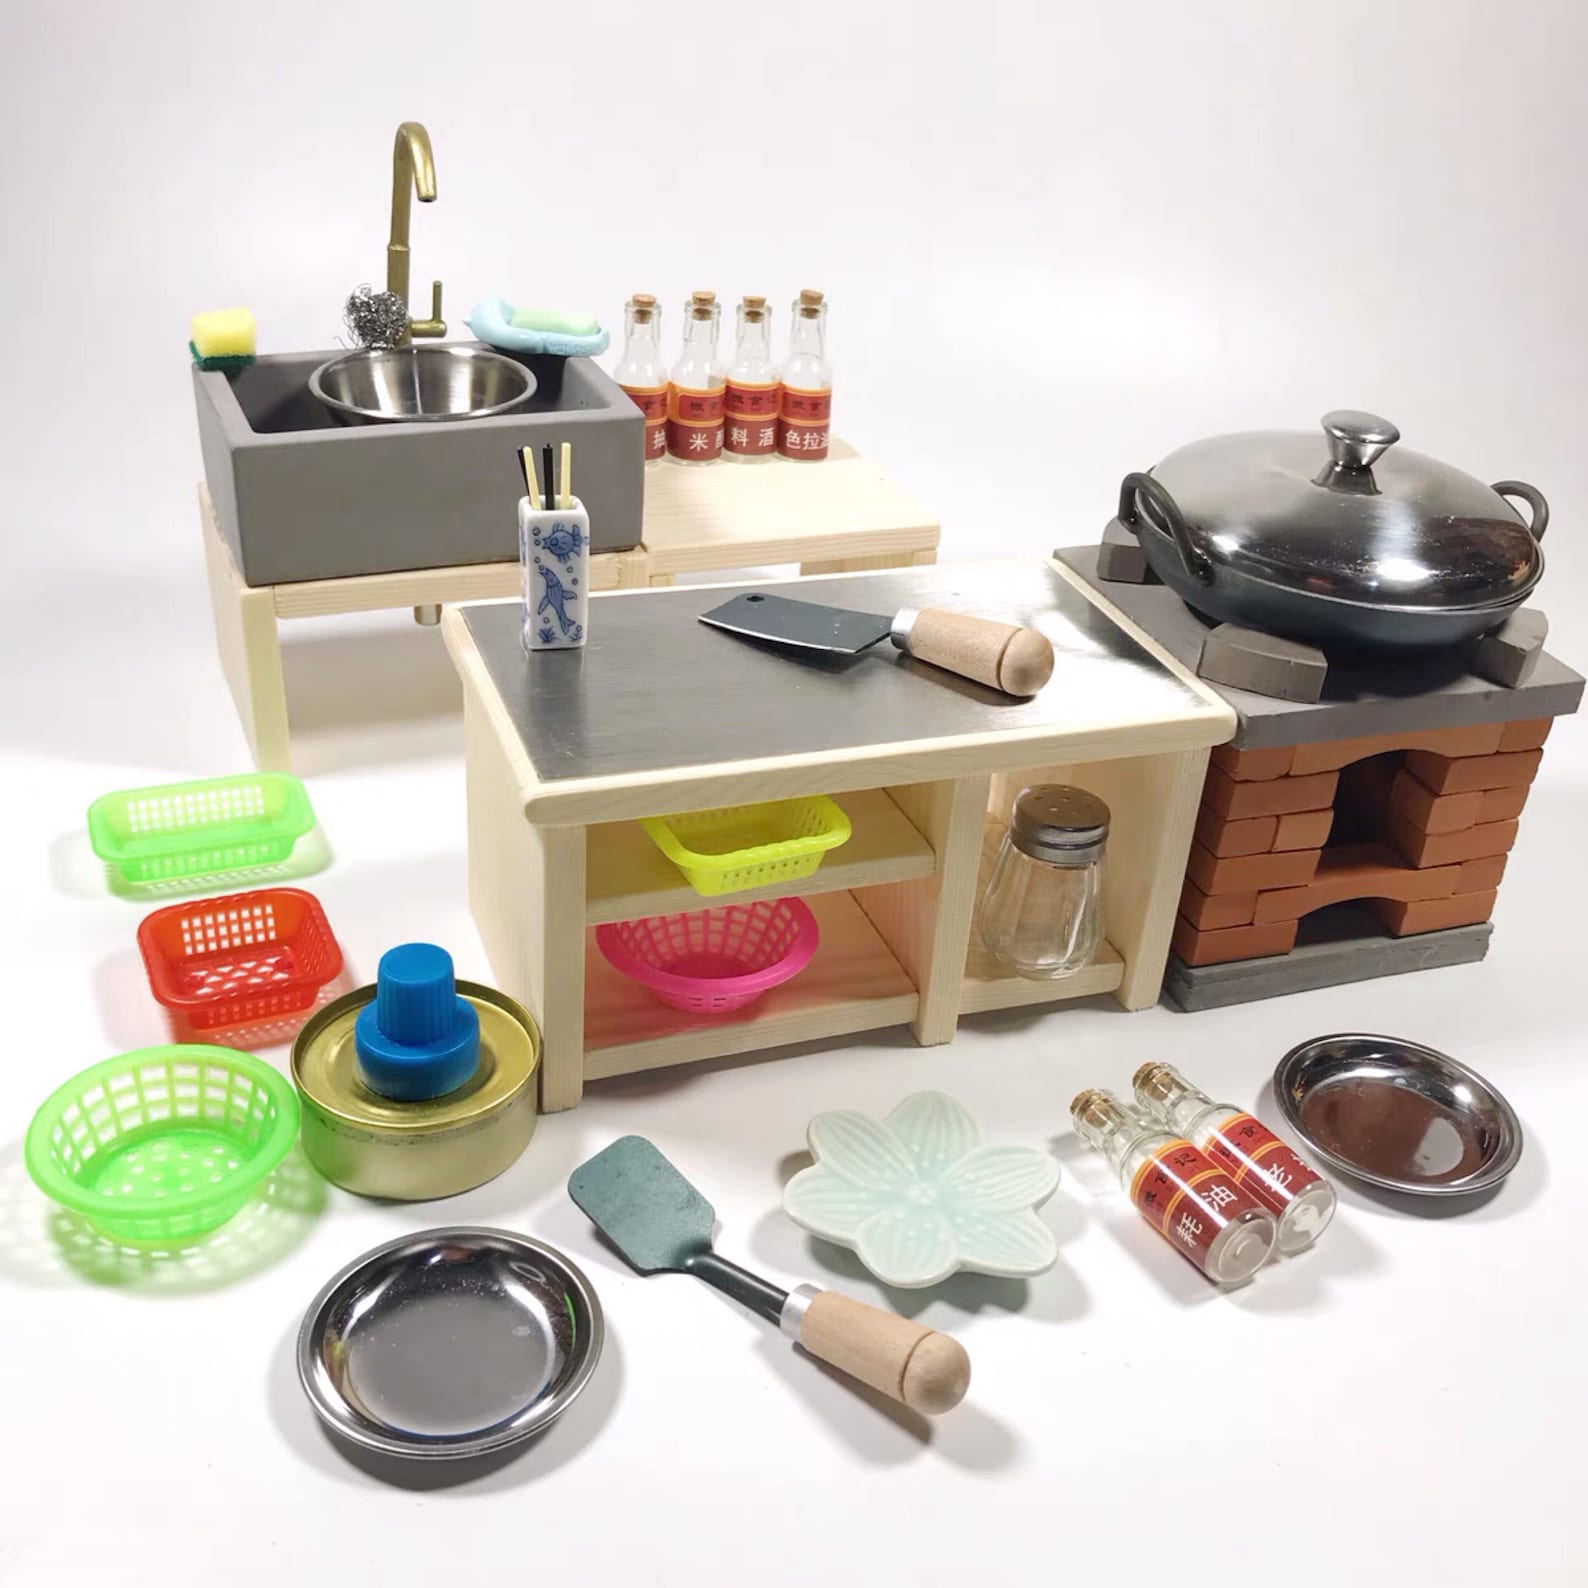 Buy Real Mini Kitchen Cooking Set for Miniature Food Cooking Online in India - Etsy